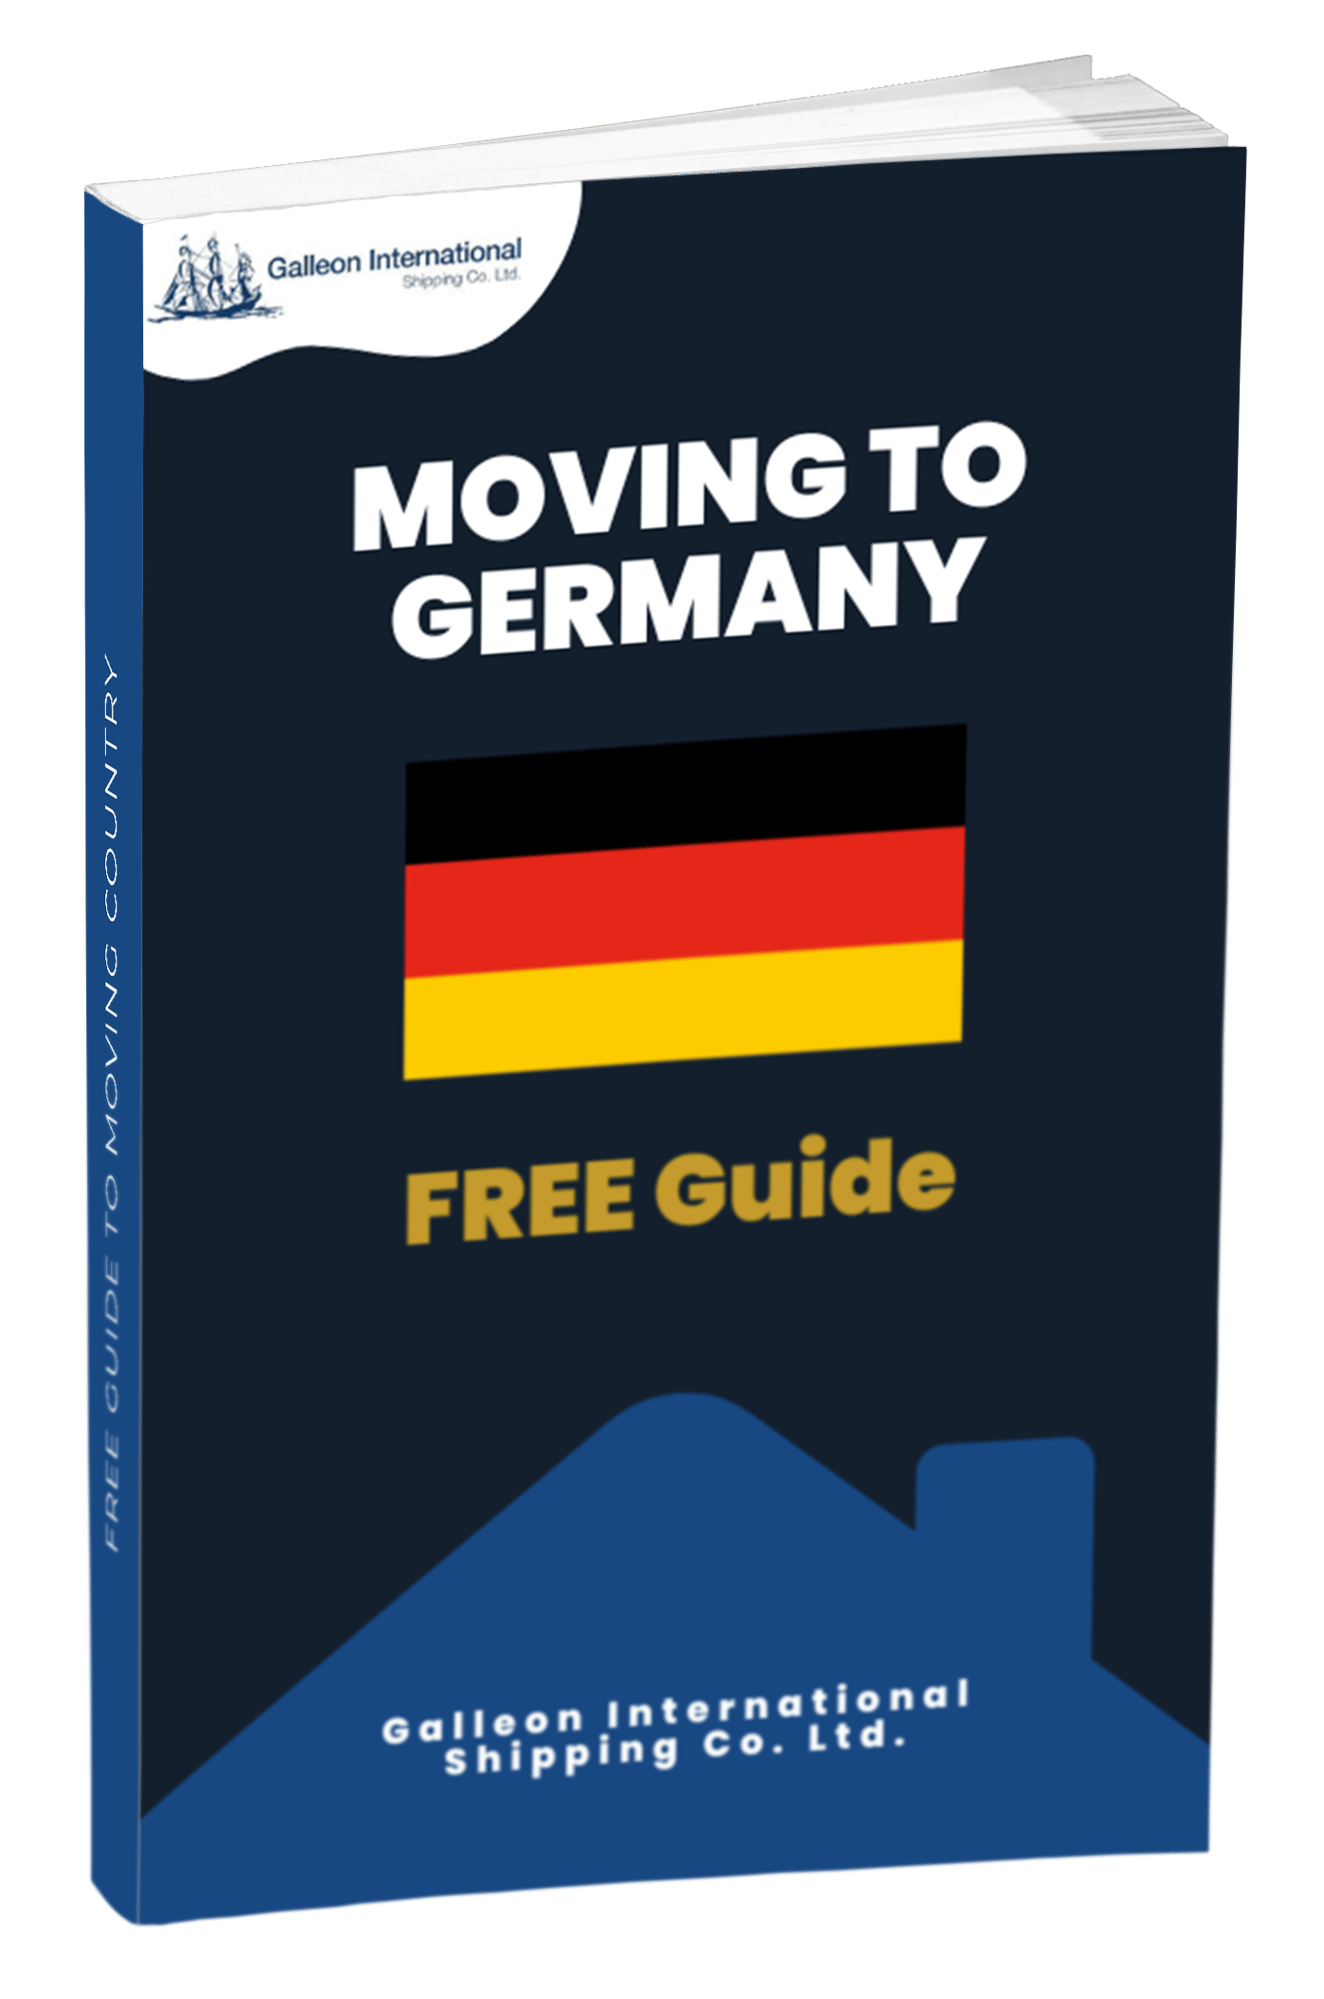 Germany Guide